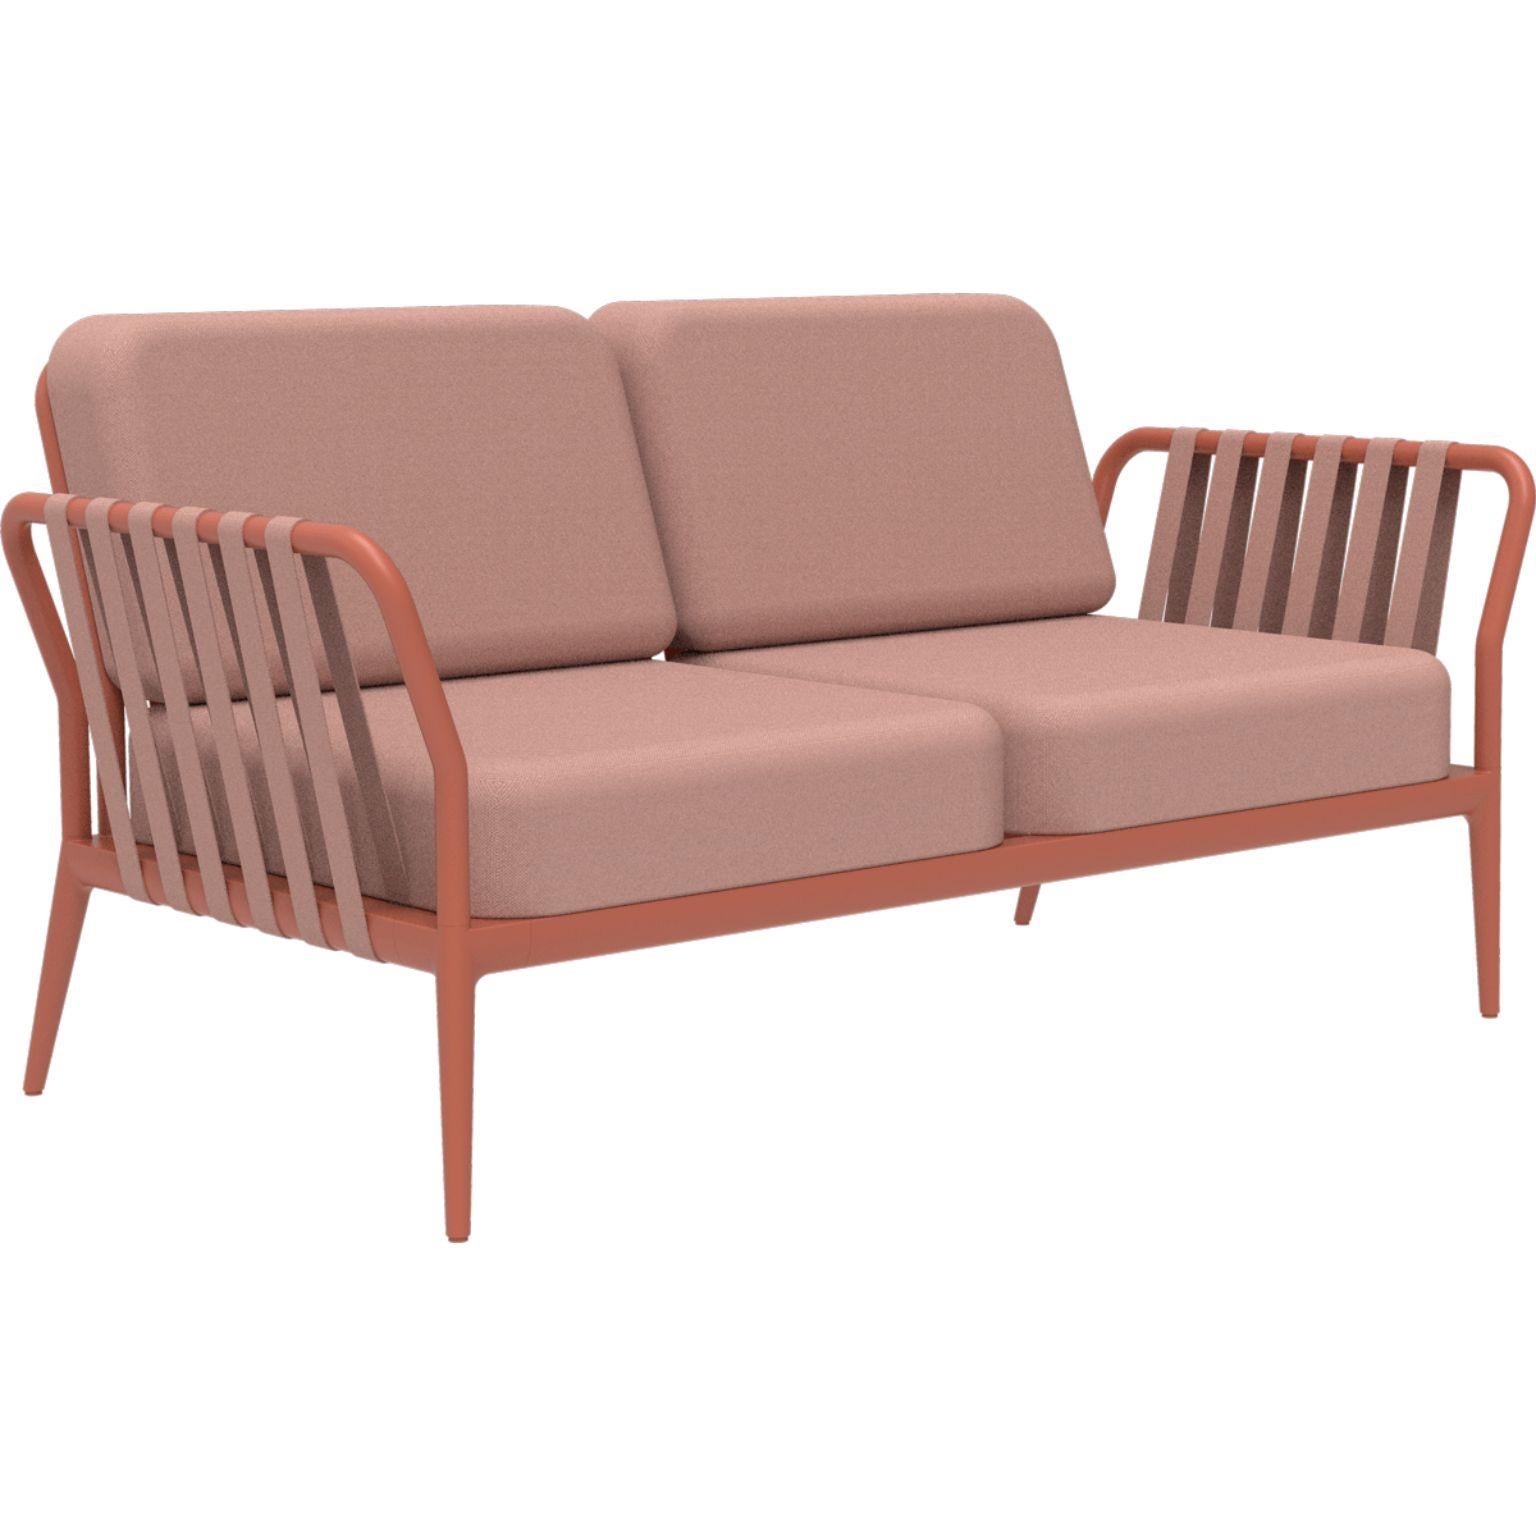 Ribbons salmon sofa by Mowee.
Dimensions: D83 x W160 x H81 cm.
Material: Aluminium, Upholstery
Weight: 32 kg
Also available in different colors and finishes. 

An unmistakable collection for its beauty and robustness. A tribute to the